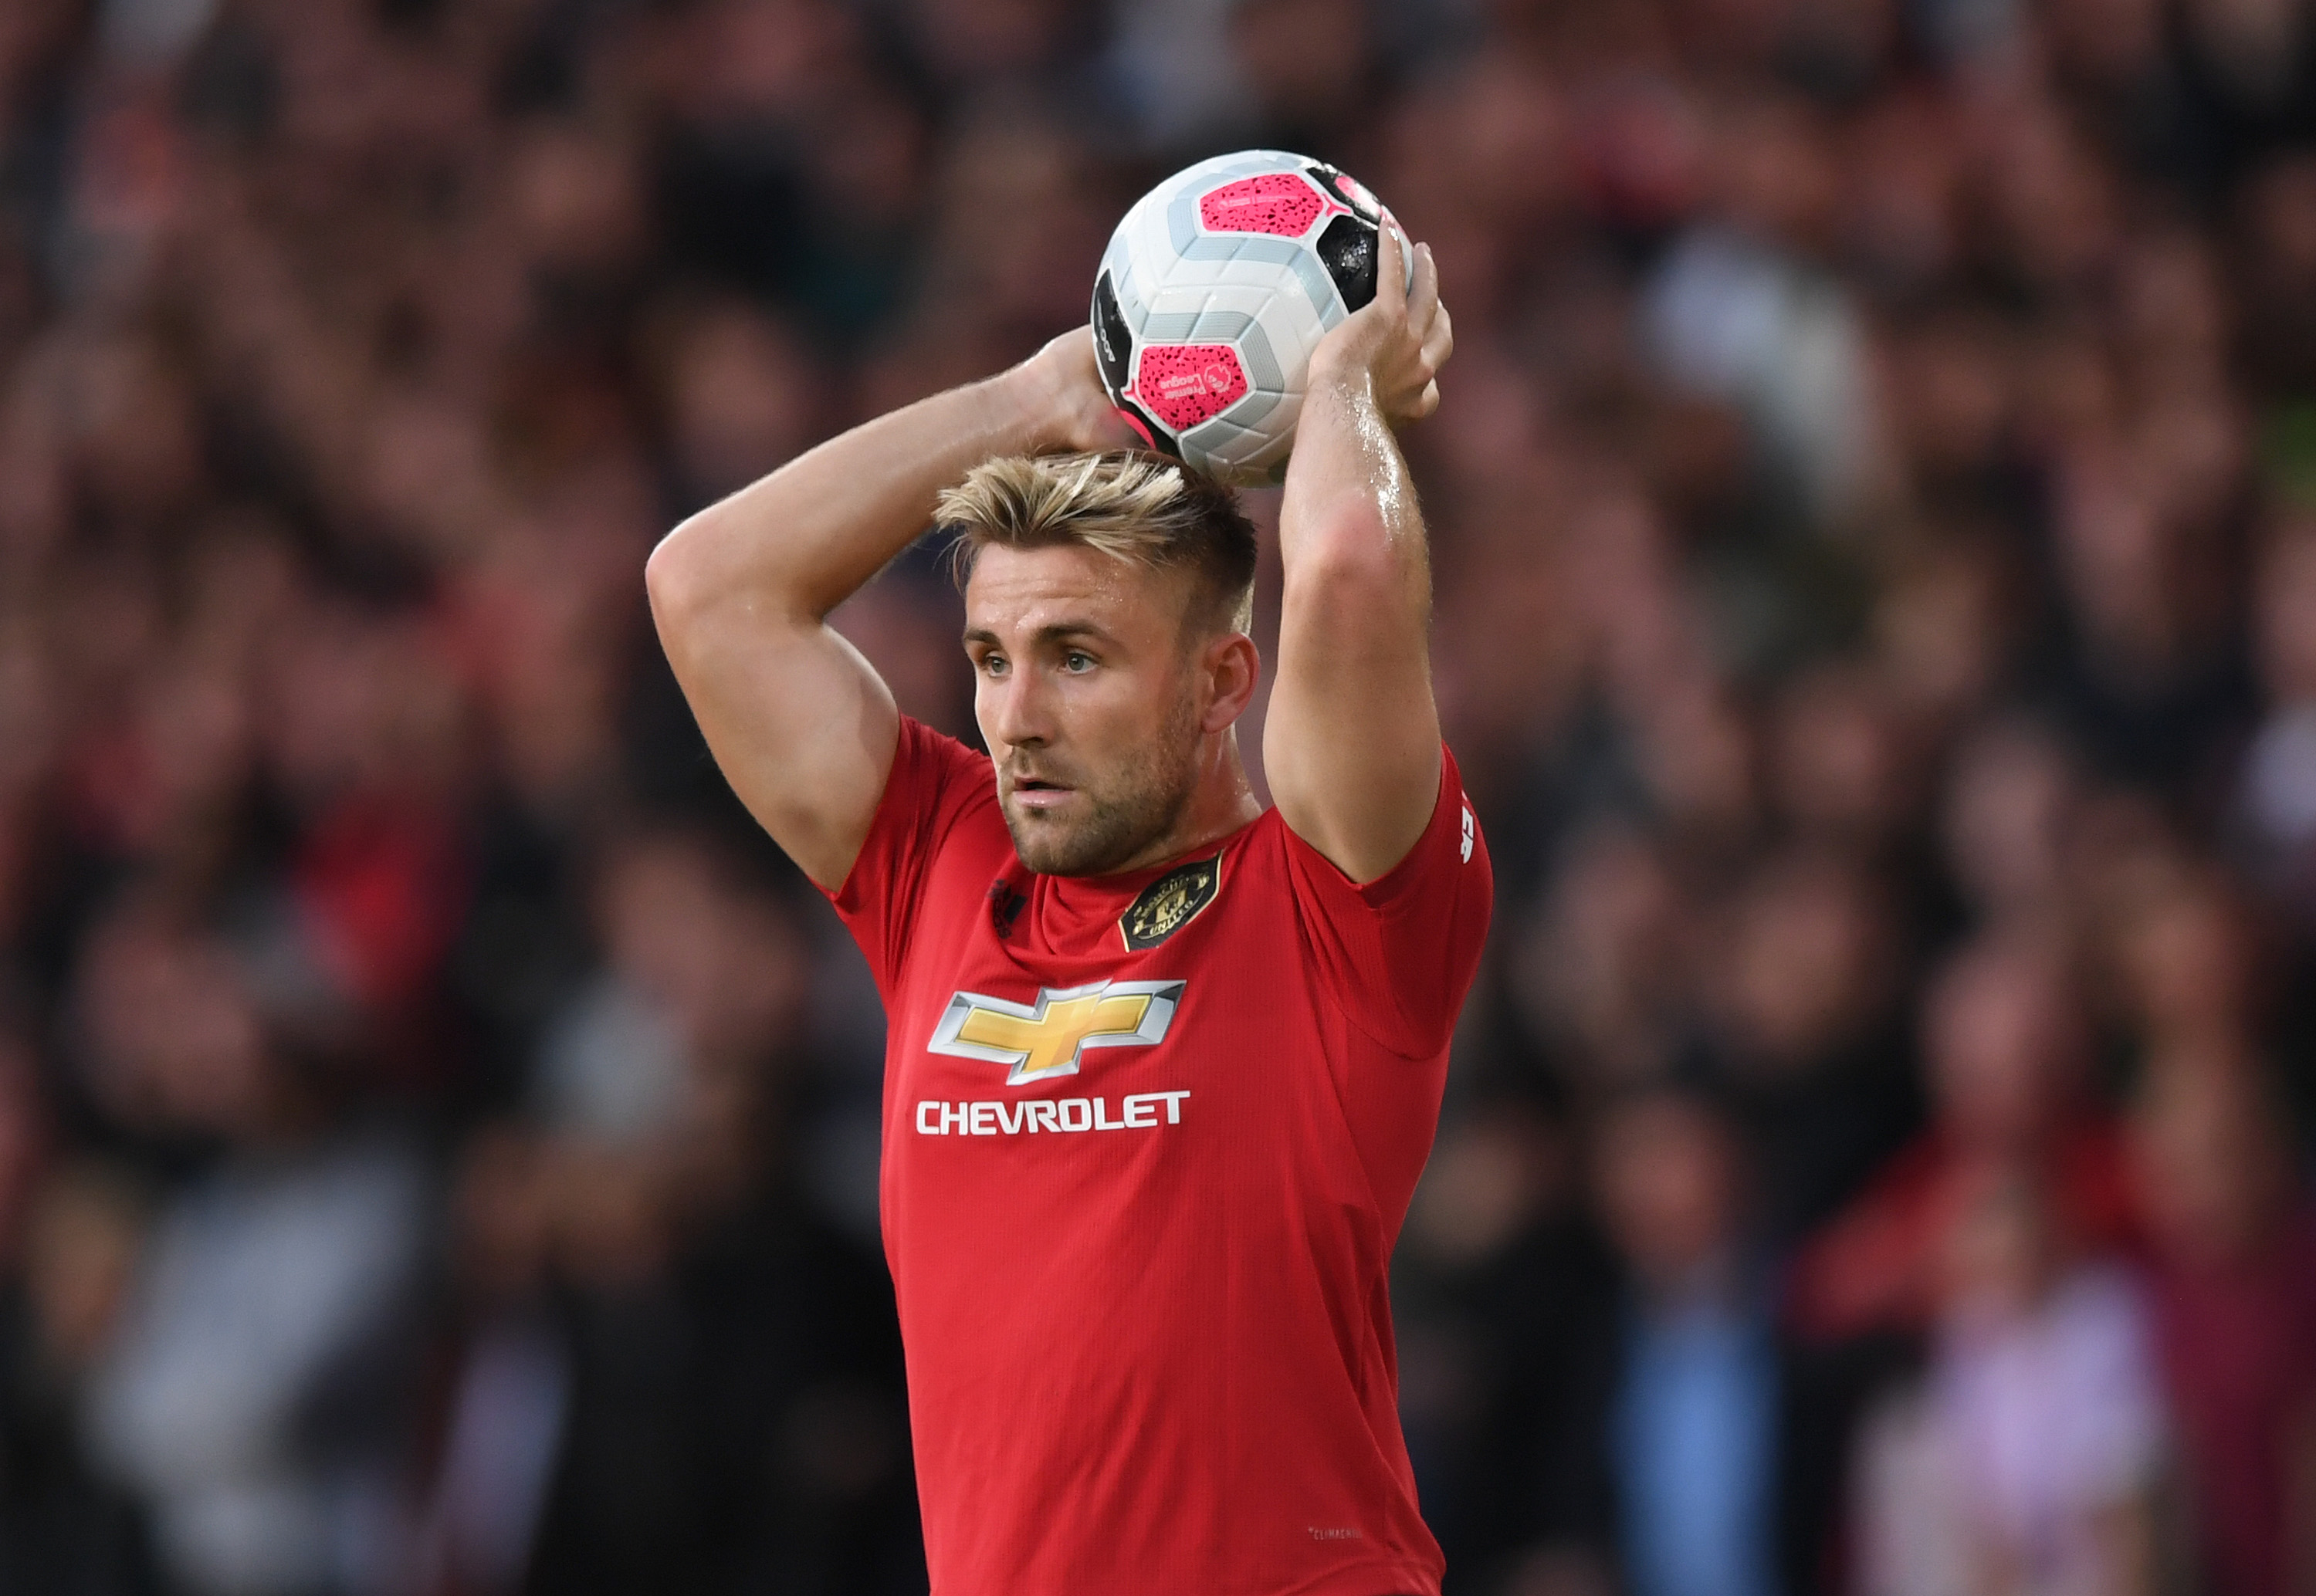 With Luke Shaw injured, the ball is in Solskjaer's court to give Brandon Williams an opportunity. (Picture Courtesy - AFP/Getty Images)